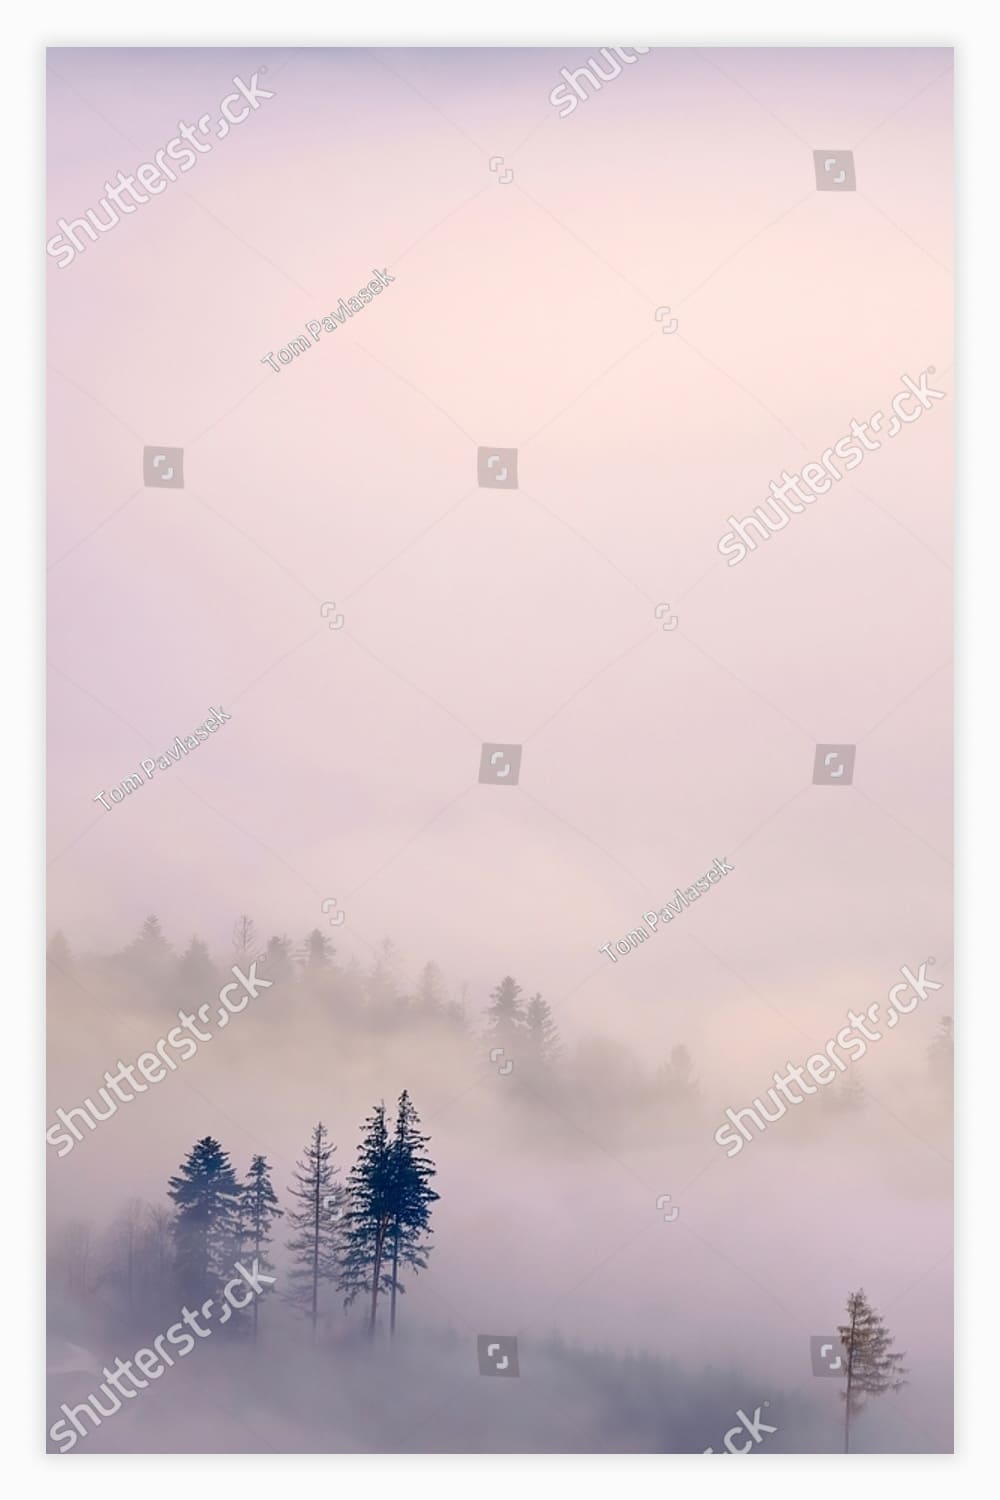 Foggy landscape with trees in the foreground.